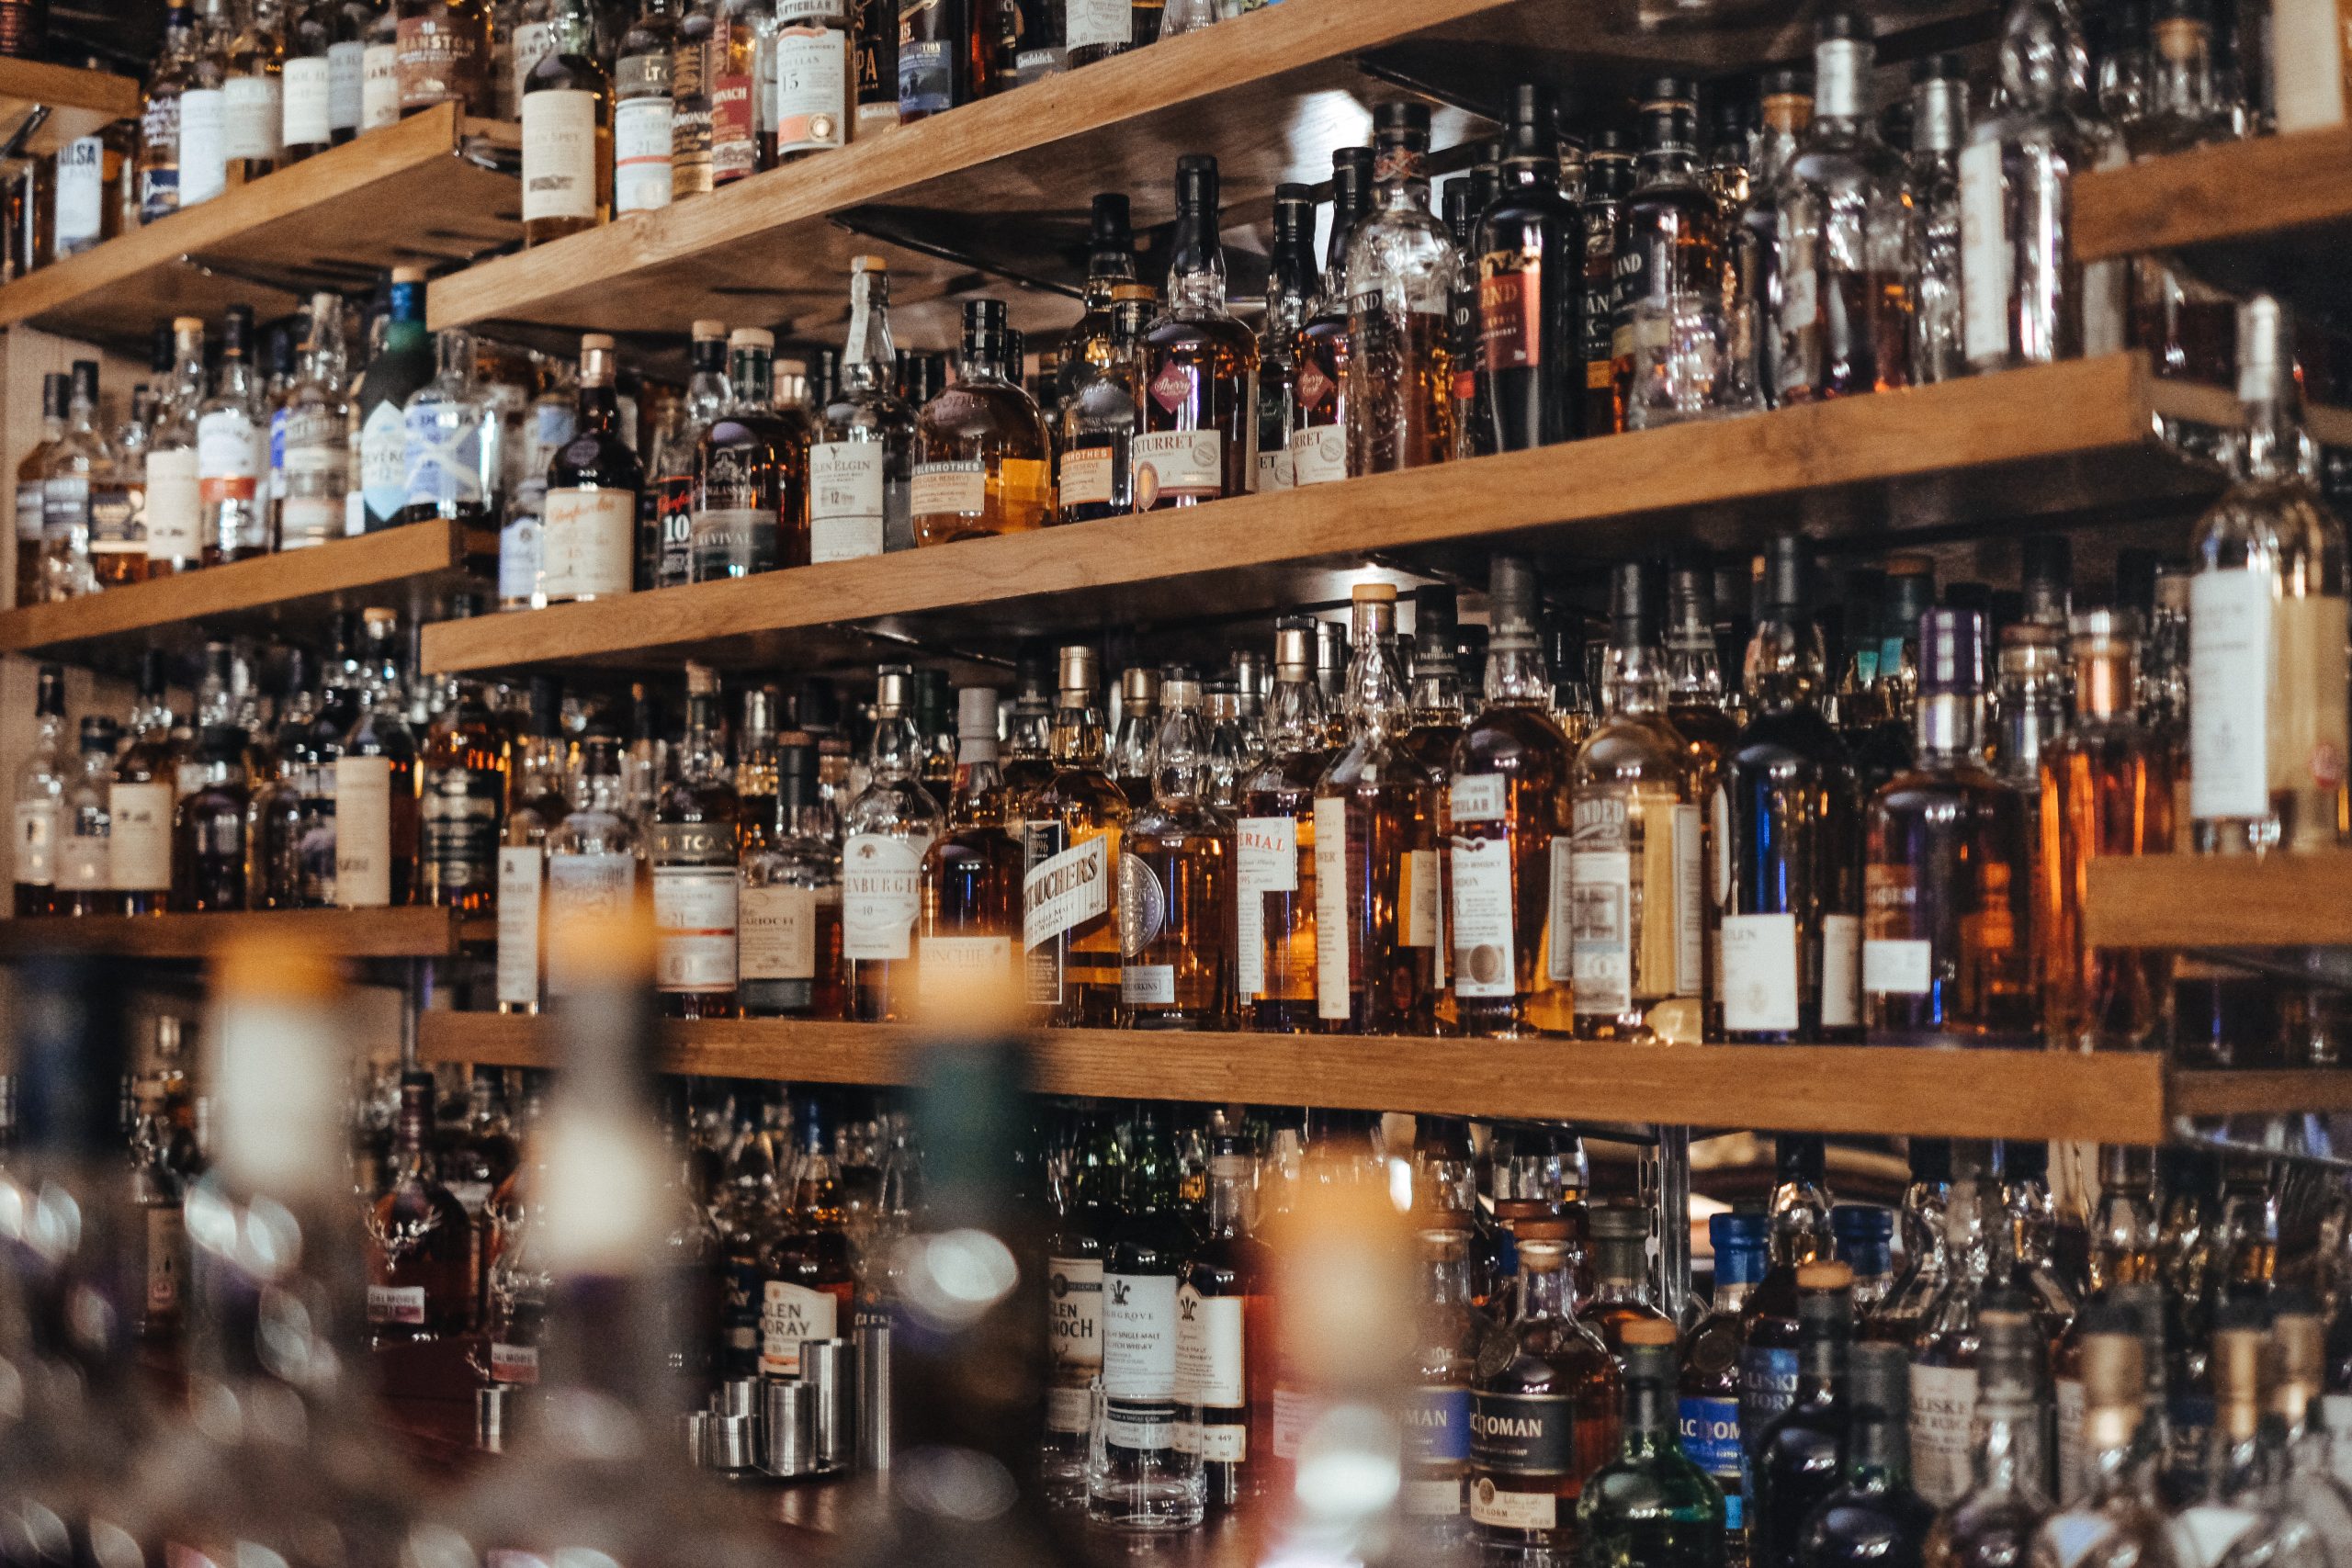 A collection of liquors and spirits.